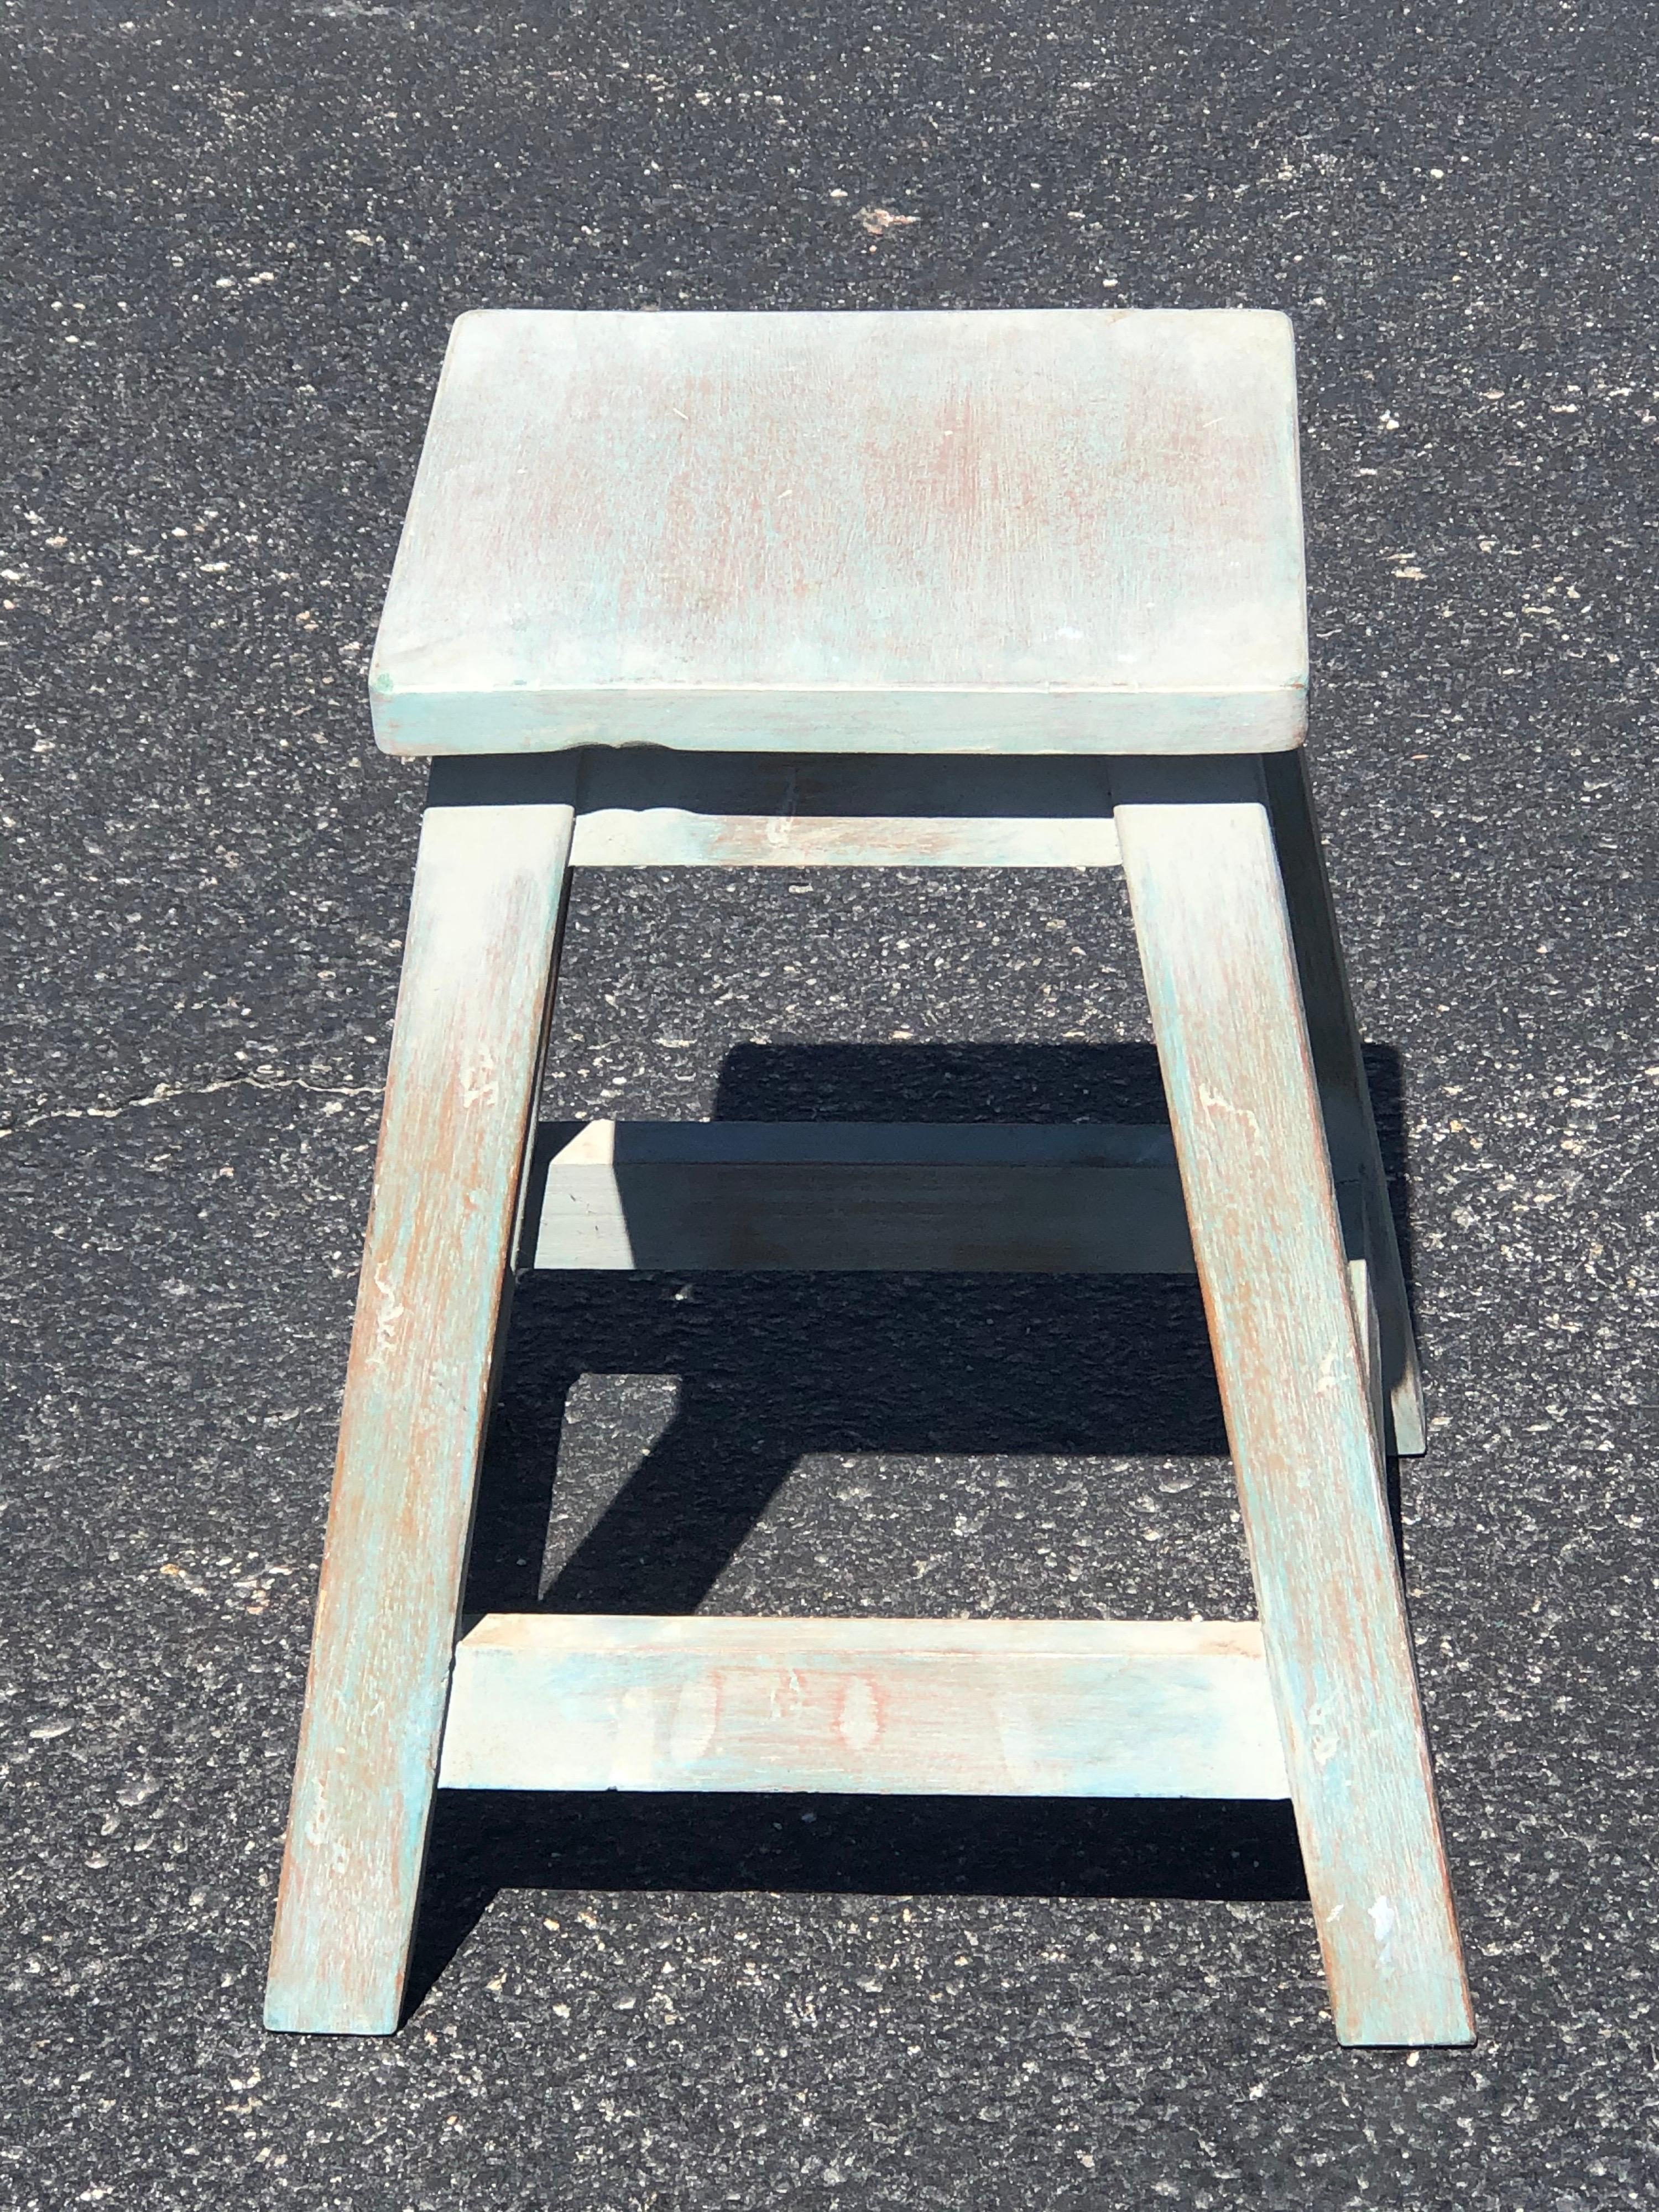 Painted Pine Stool or Small Table 13